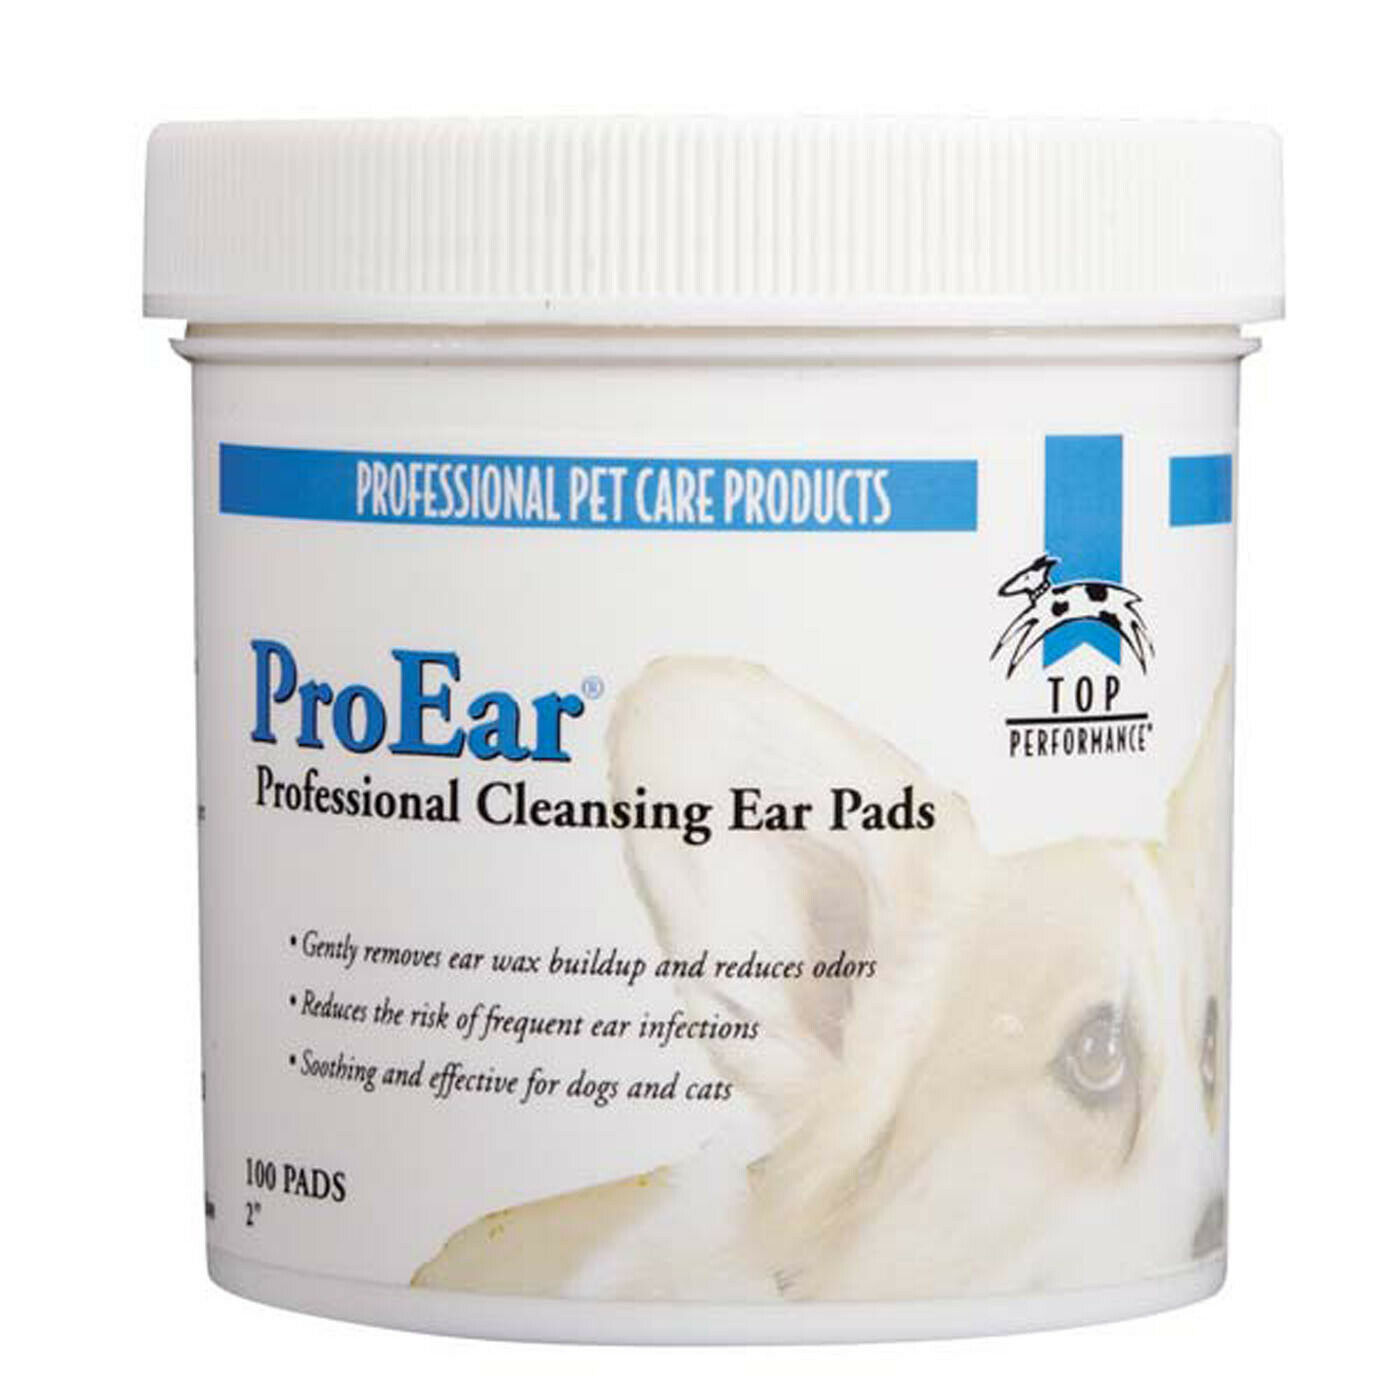 Dog Ear Cleaning Wipes Cleaner Pads Ideal For Dogs And Cats 100 Count